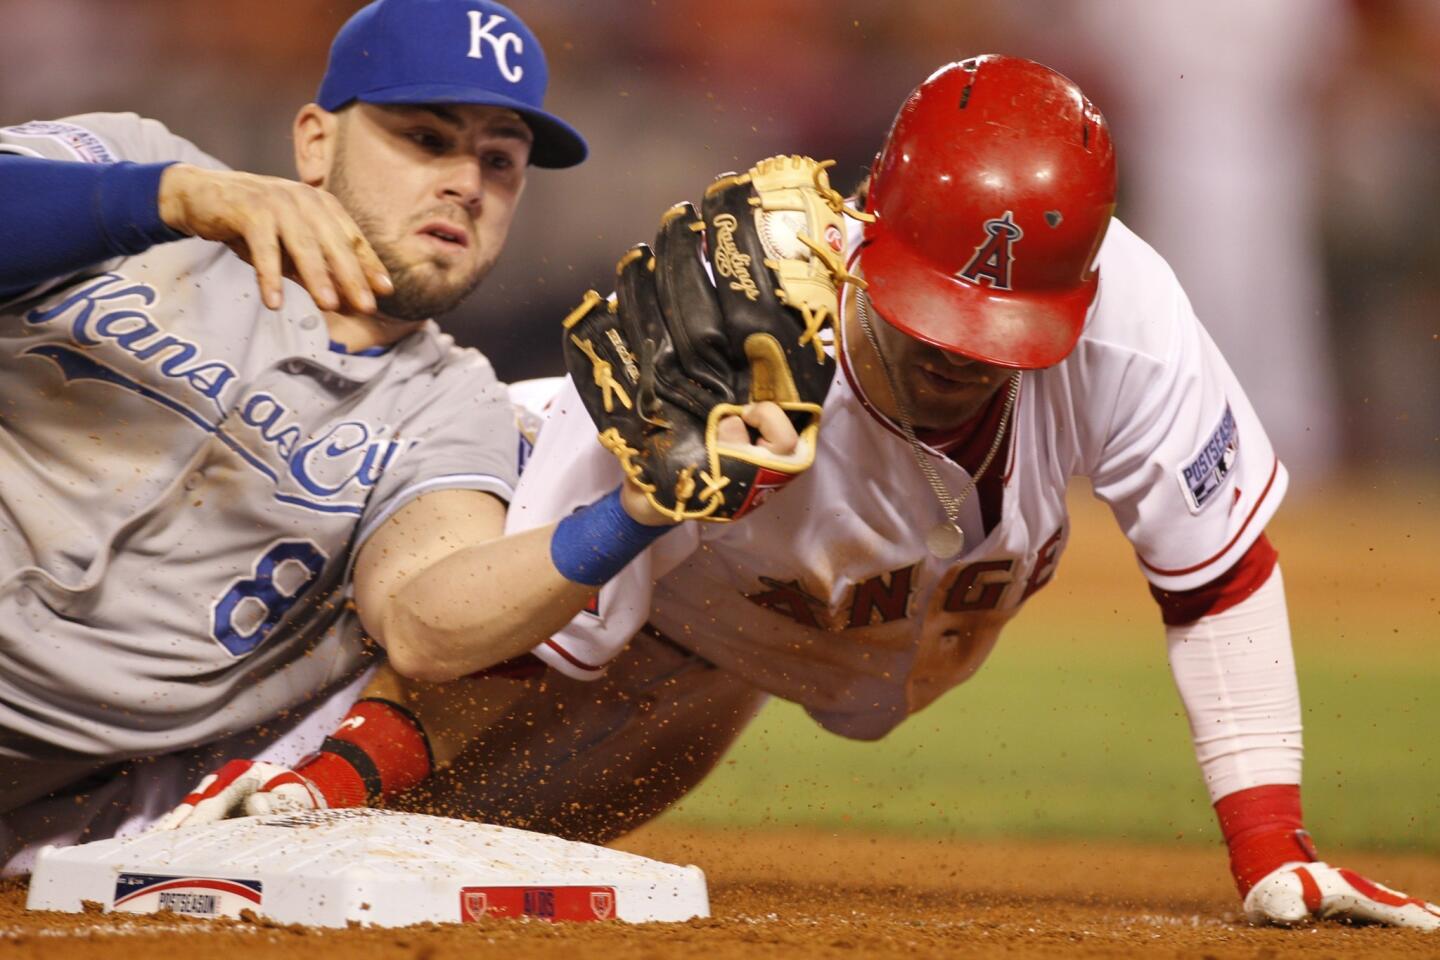 Collin Cowgill, Mike Moustakas